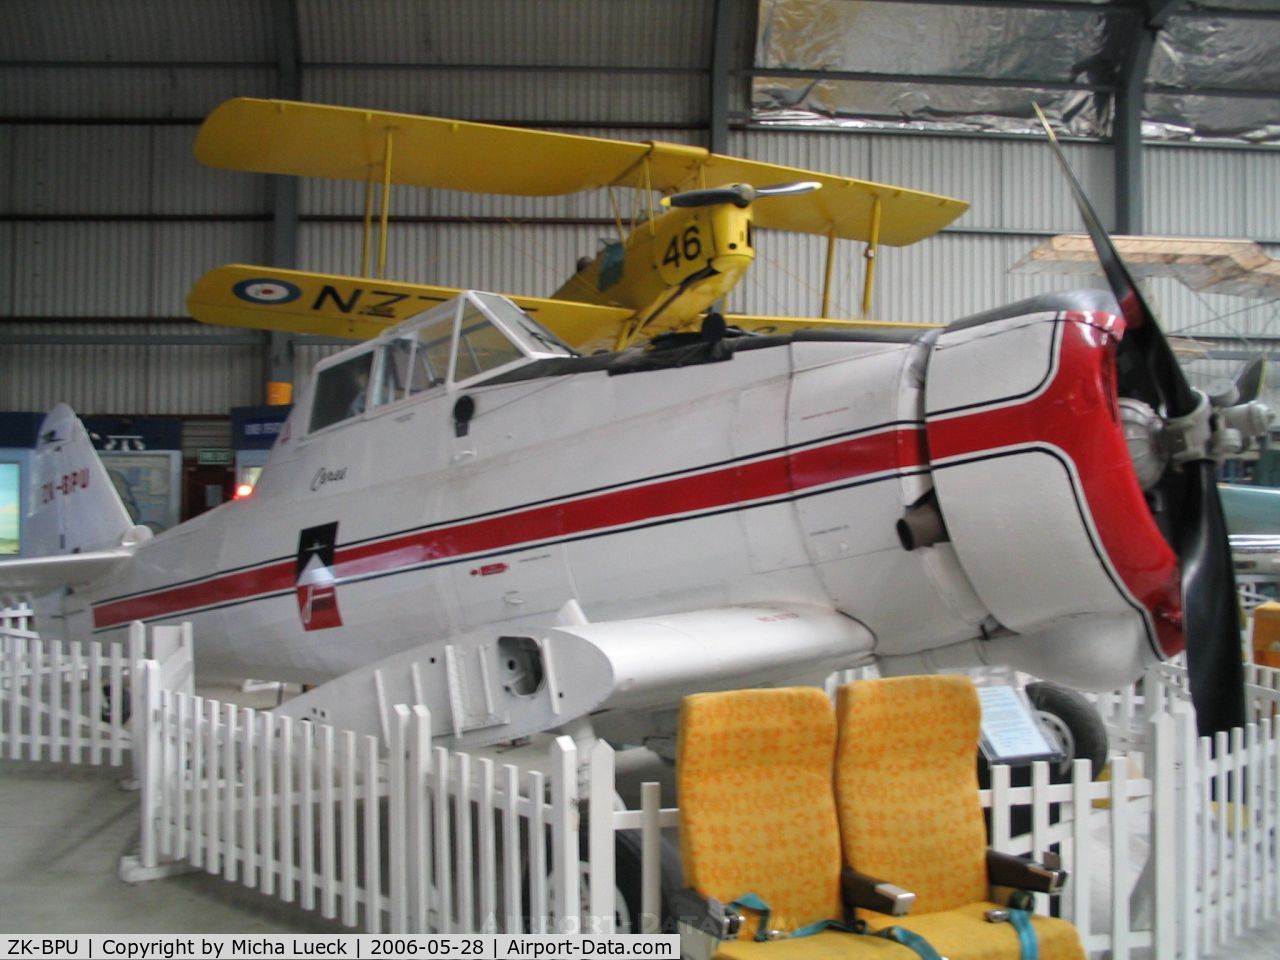 ZK-BPU, Commonwealth CA-28B Ceres C/N 4, Ceres Agricultural Aeroplane, preserved at the Museum of Transport and Technology (MOTAT) in Auckland, New Zealand